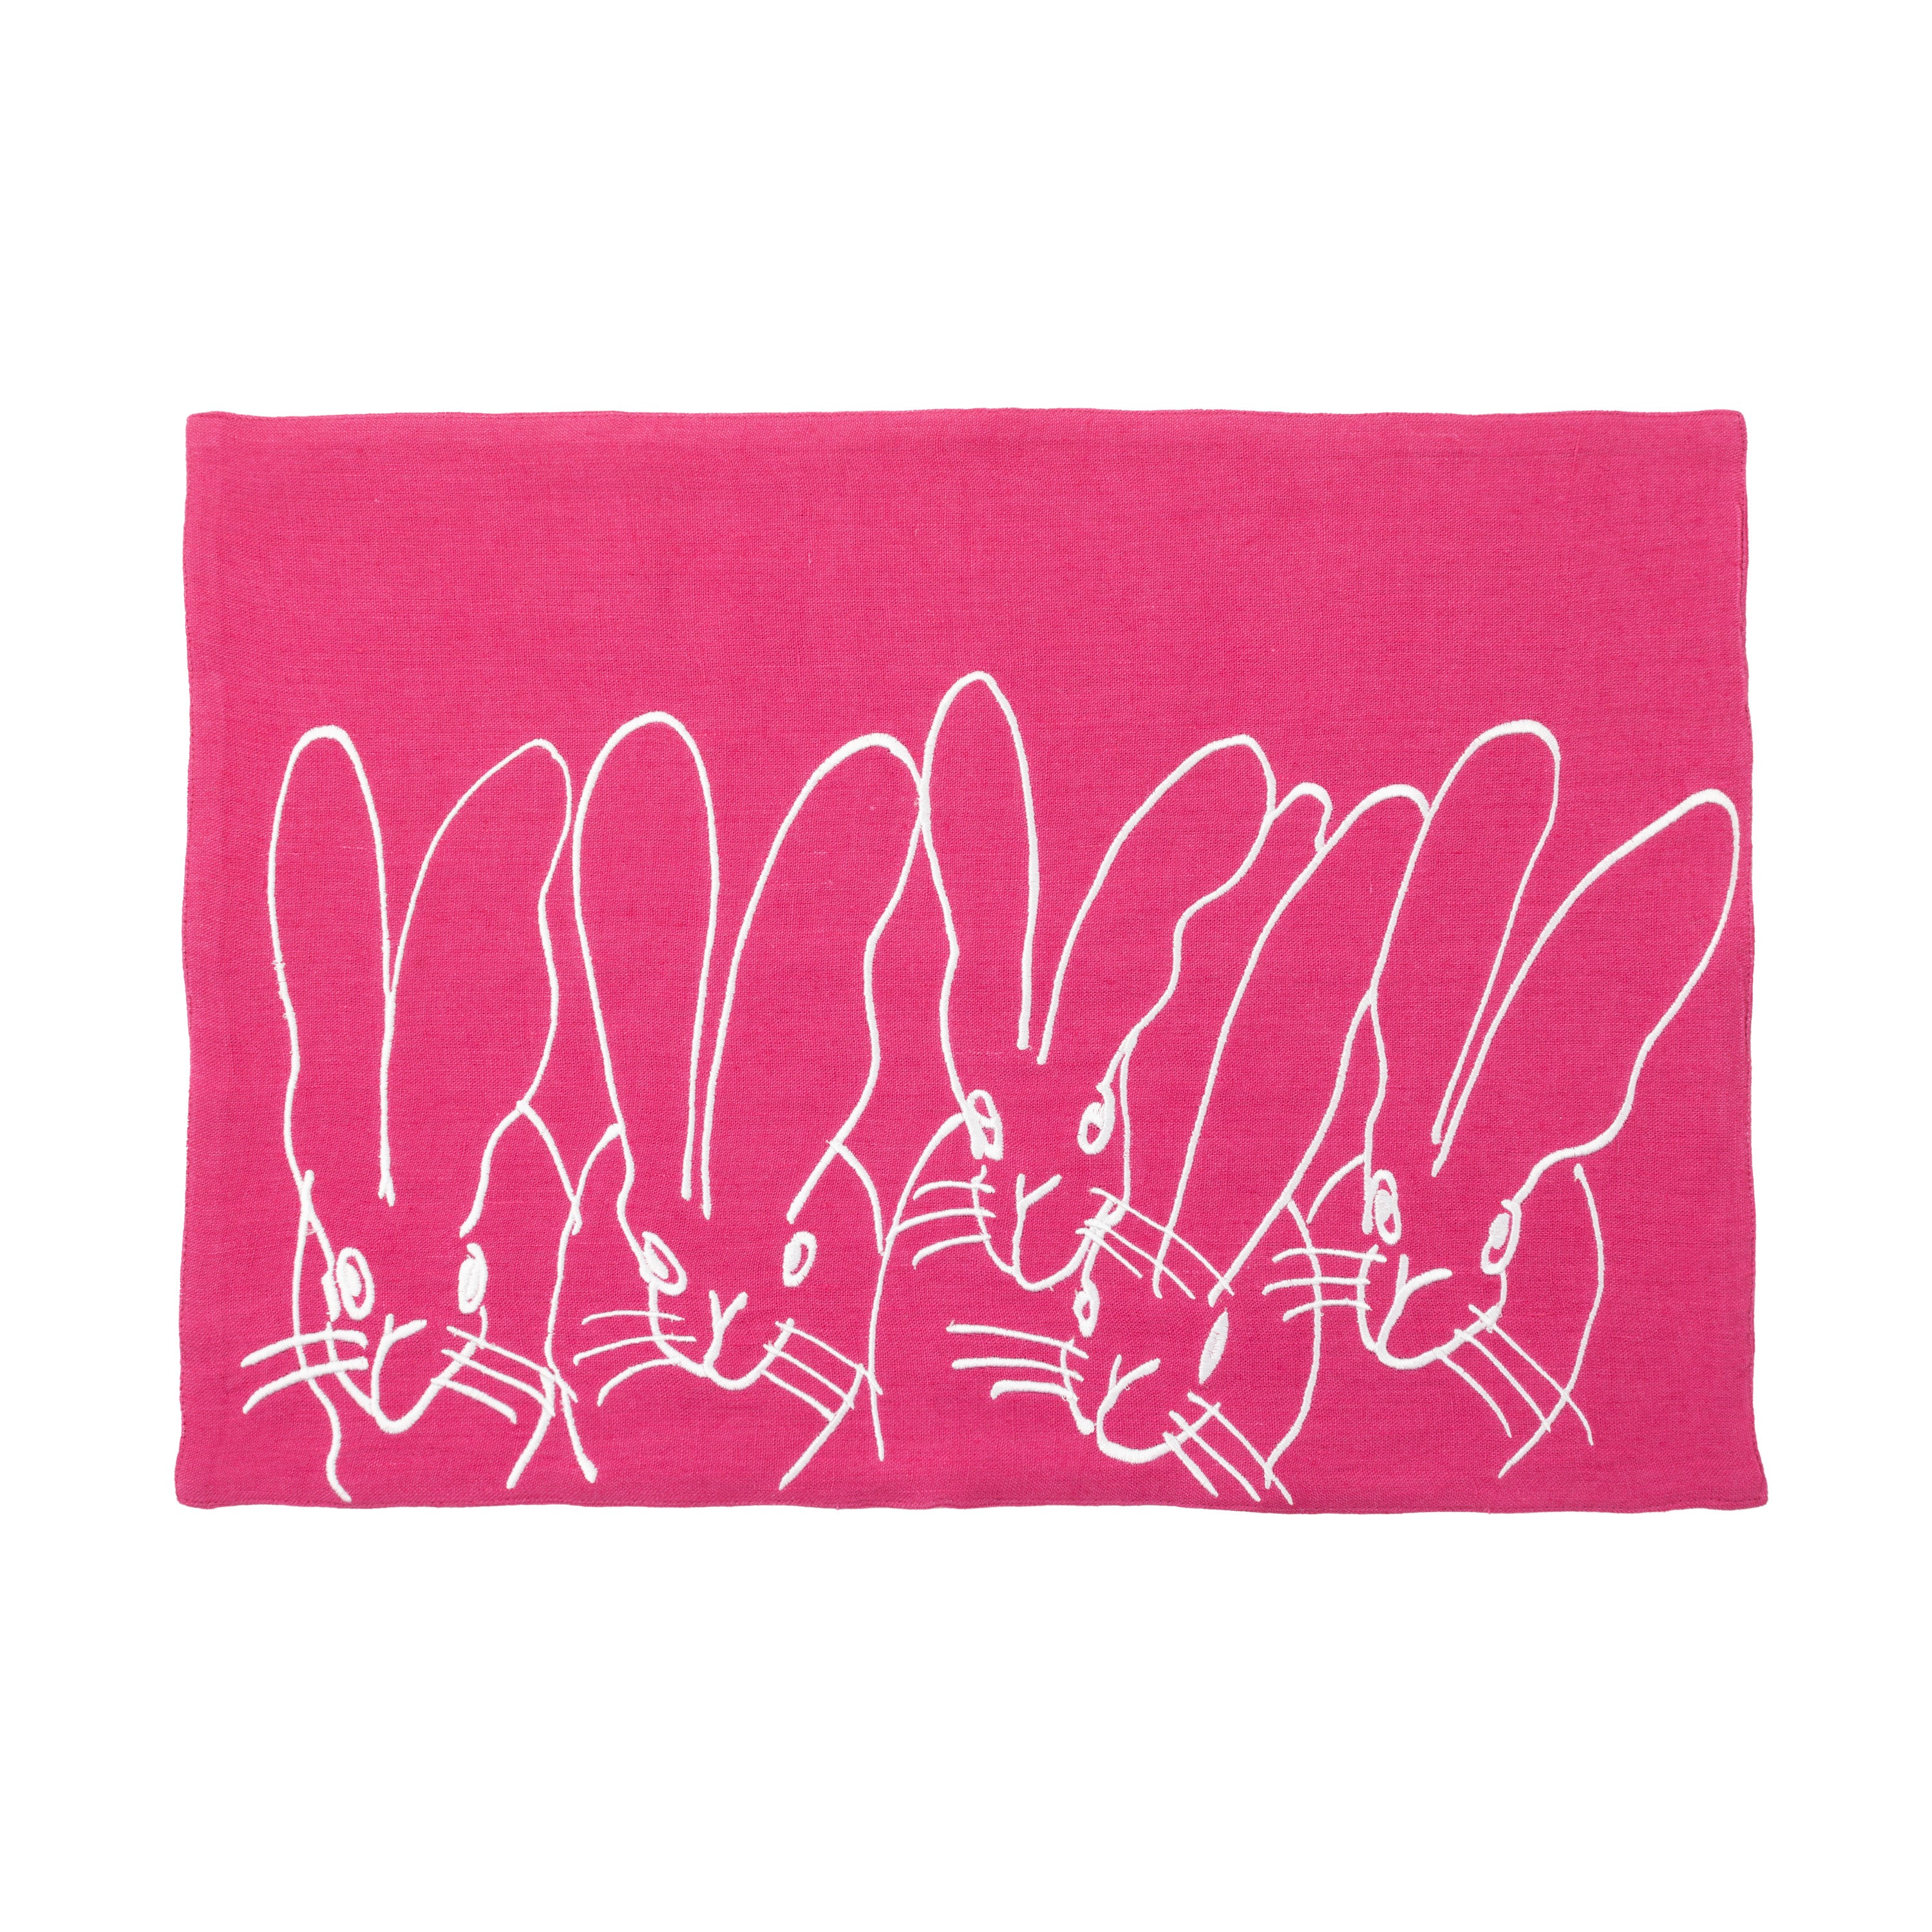 Band of Bunnies Embroidered Linen Placemat, Set of 2, Pink Peacock